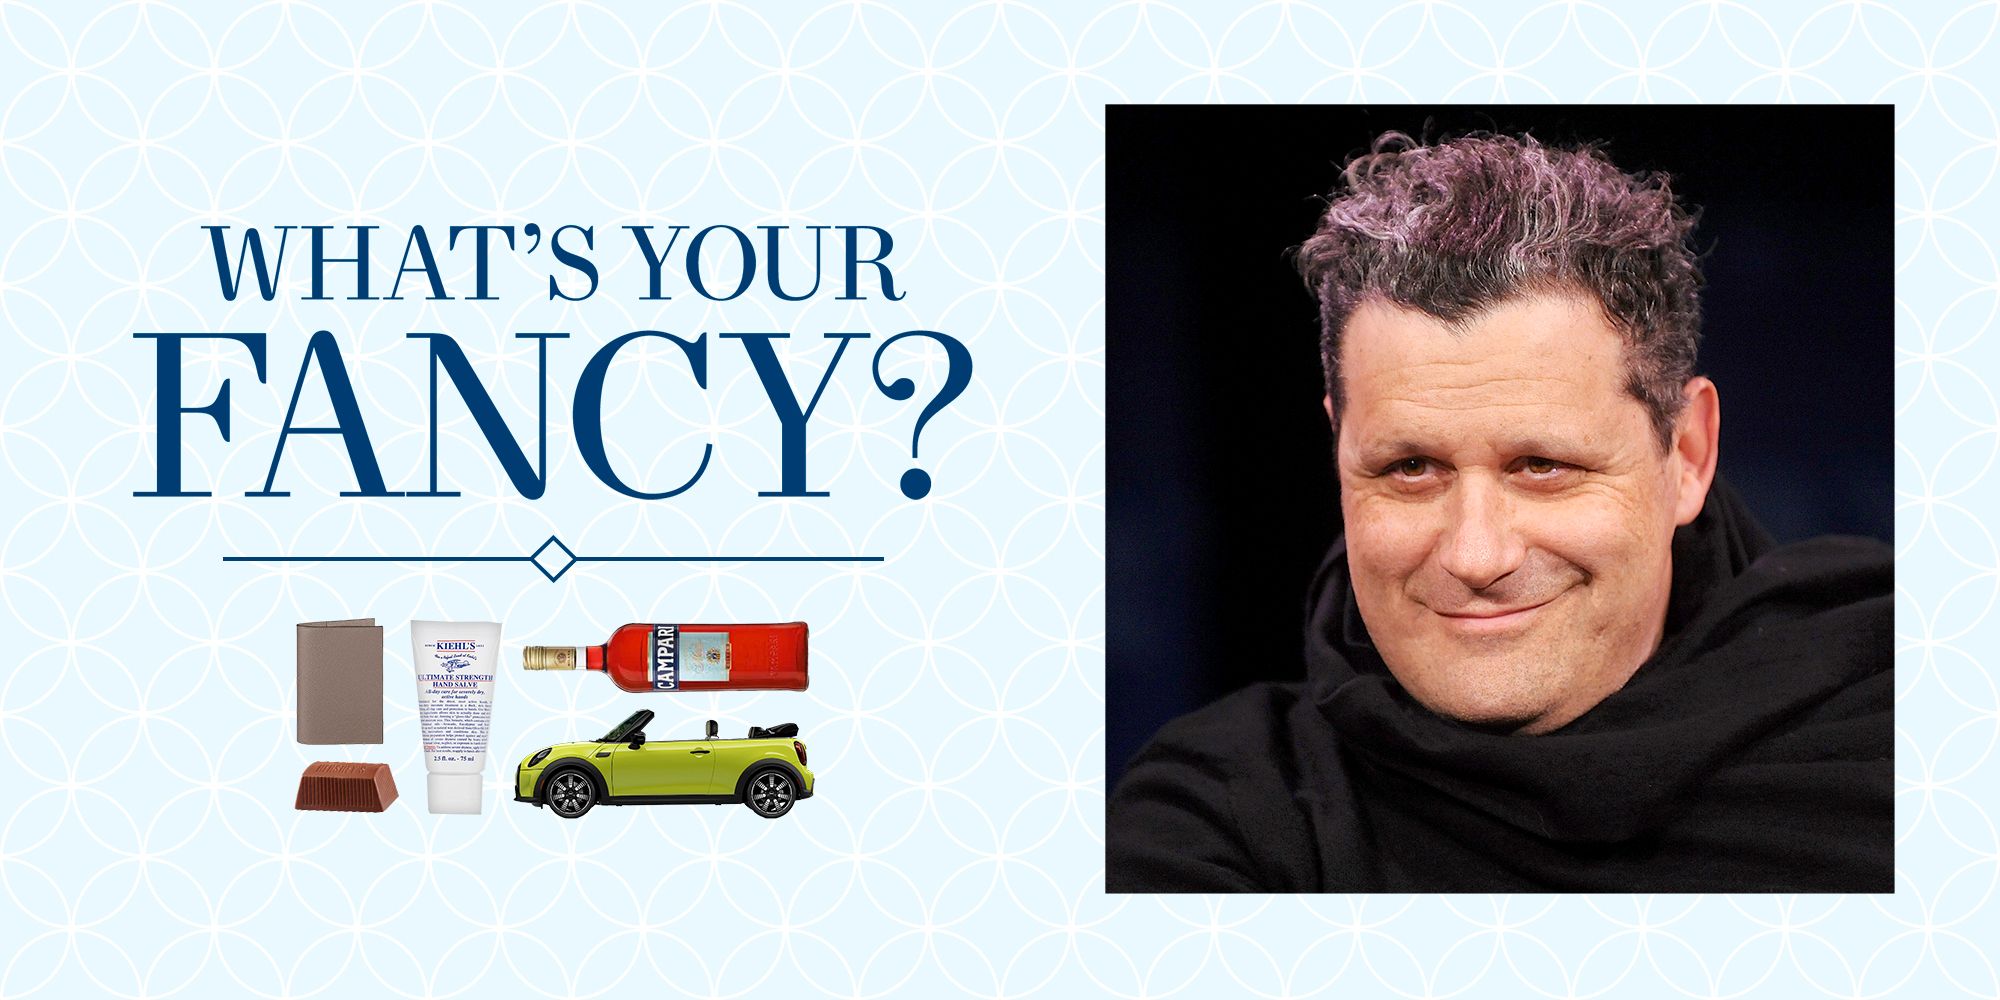 Isaac Mizrahi Shares the 9 Things He Can't Live Without